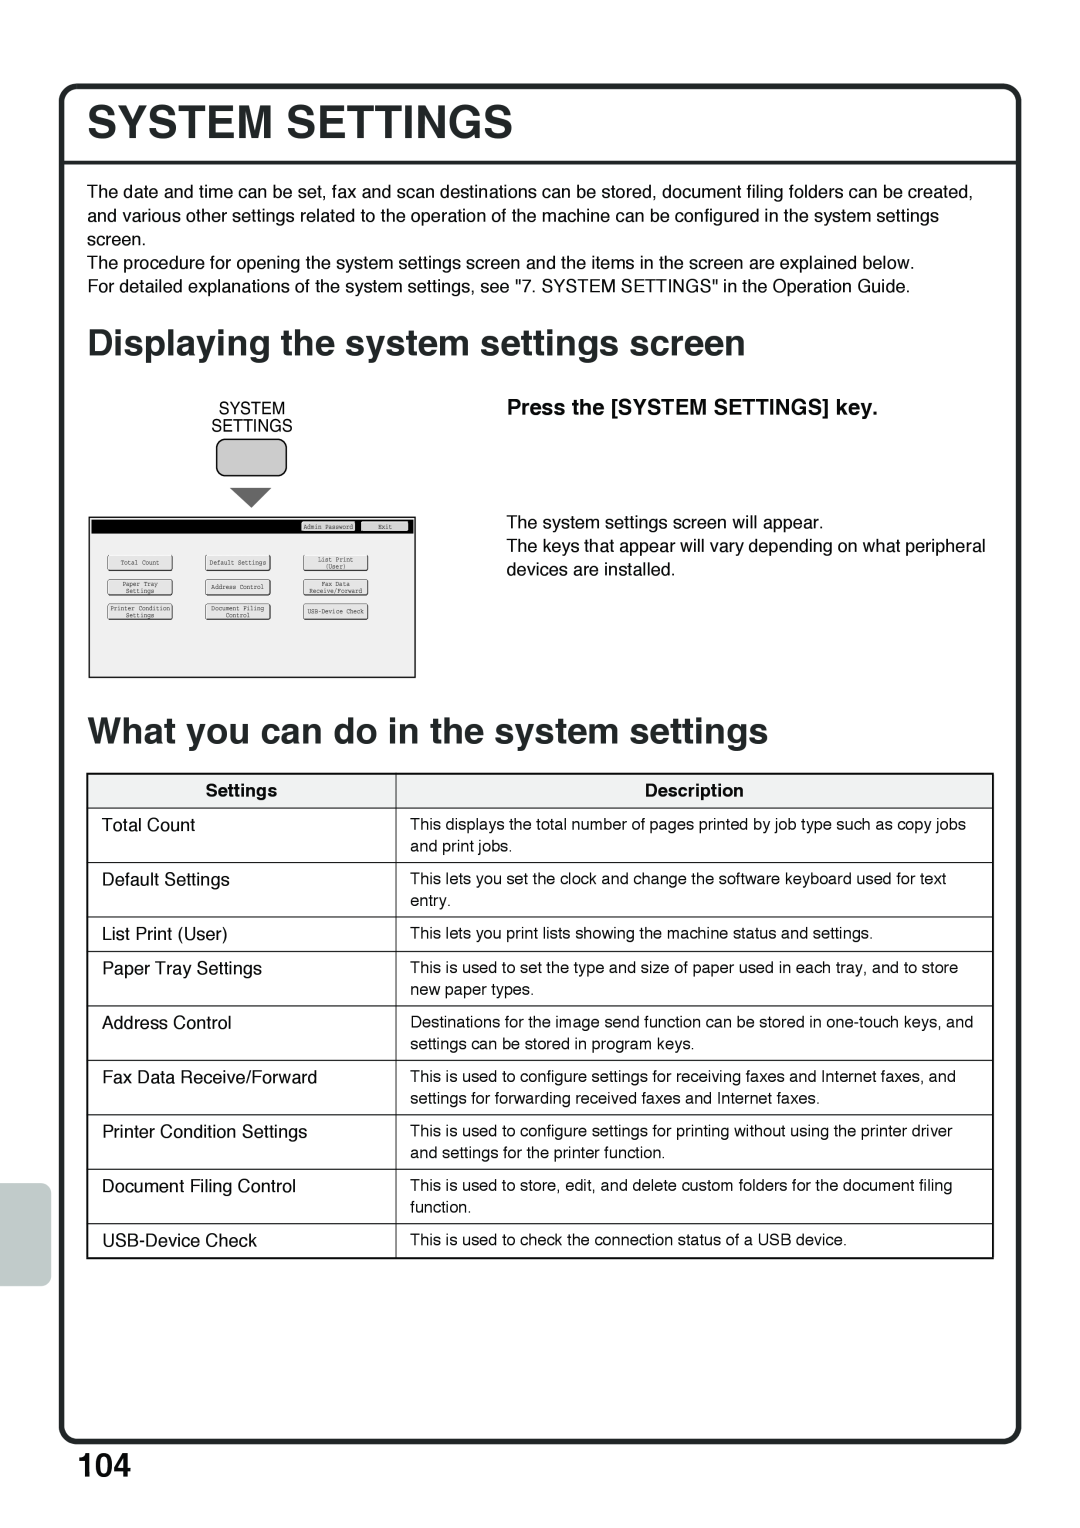 Sharp MX-4101N System Settings, Displaying the system settings screen, What you can do in the system settings, Description 